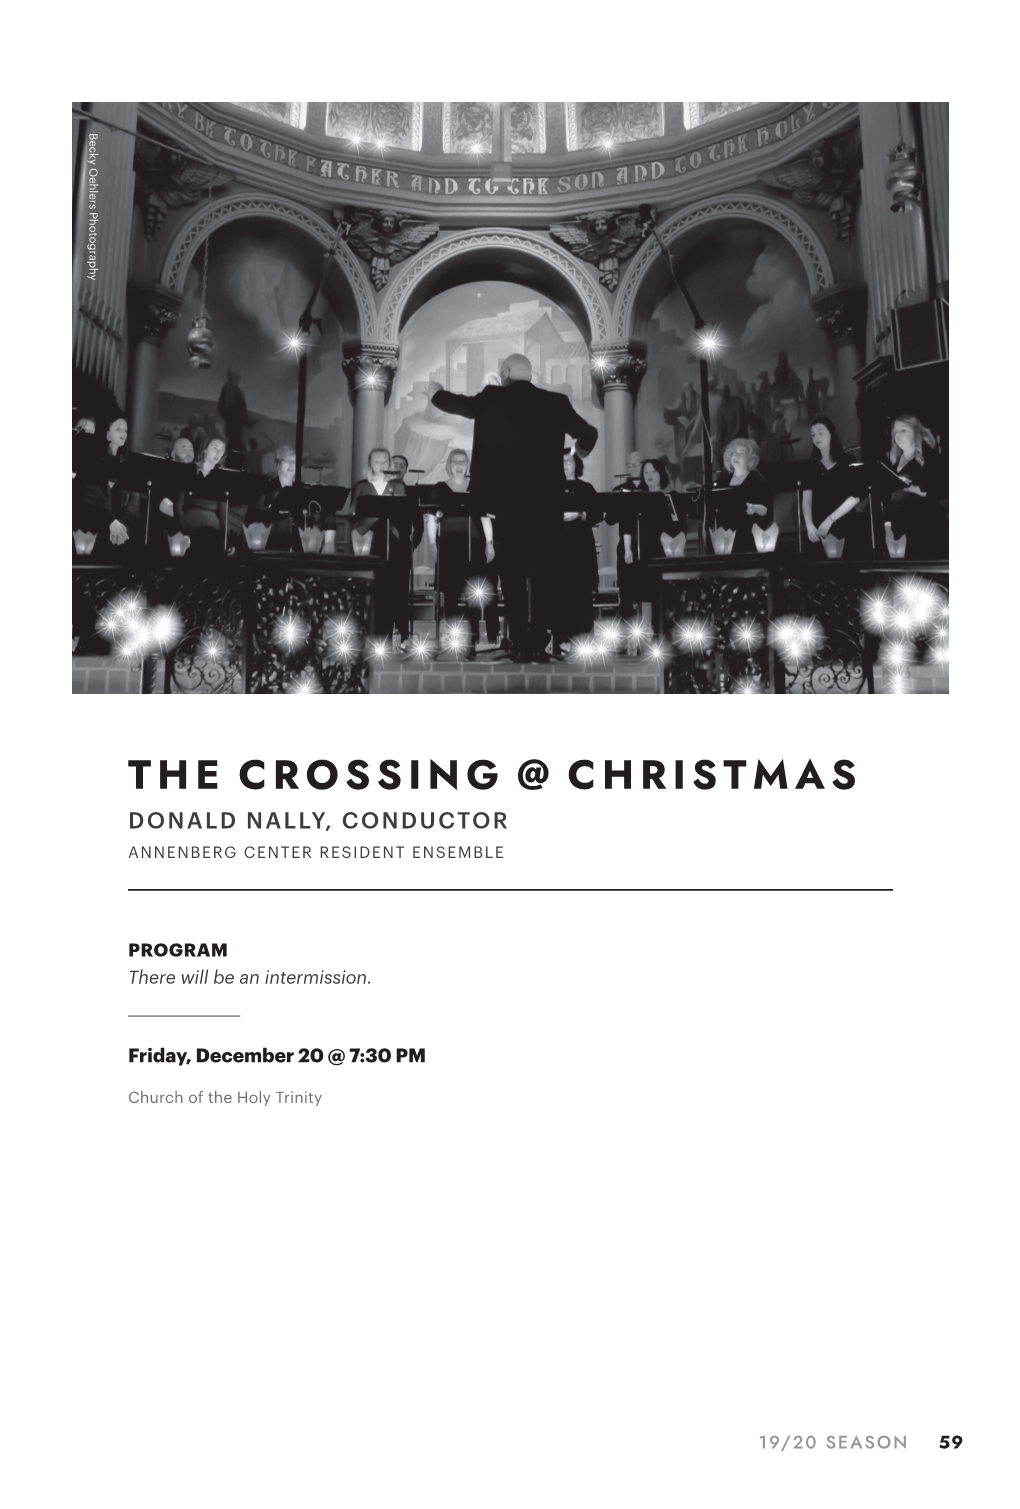 The Crossing @ Christmas Donald Nally, Conductor Annenberg Center Resident Ensemble